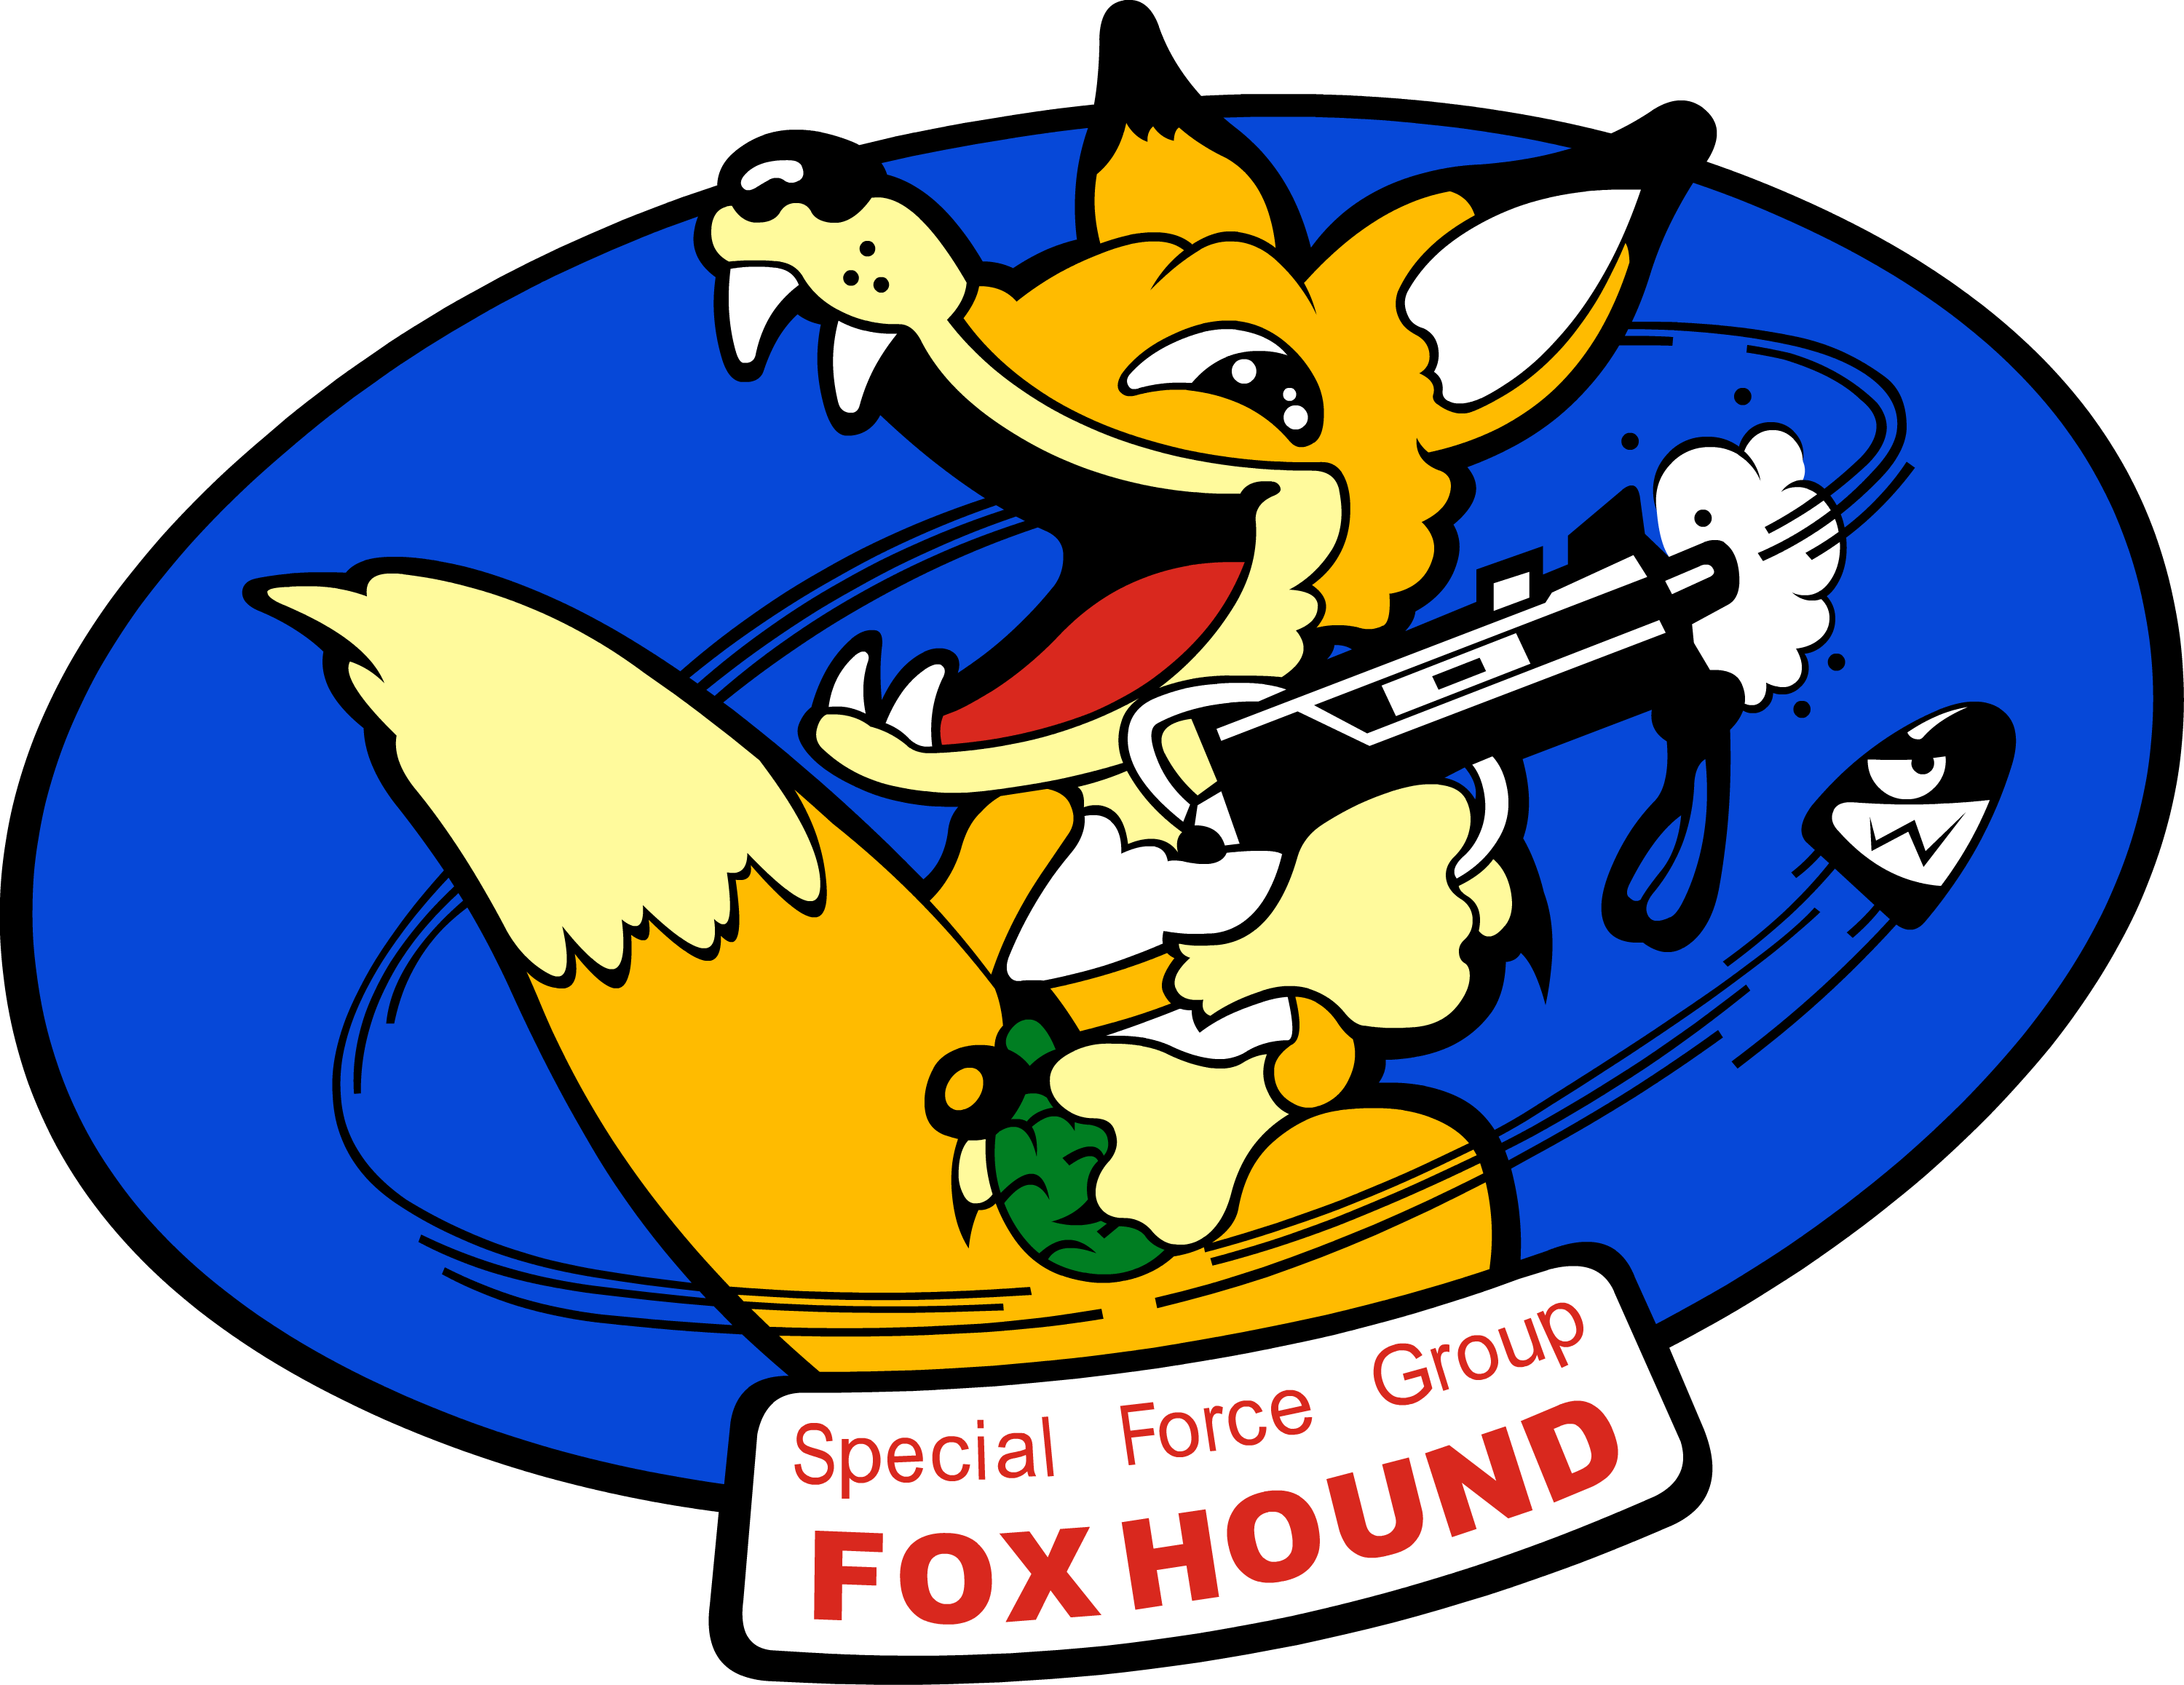 Special Force Group FOXHOUND